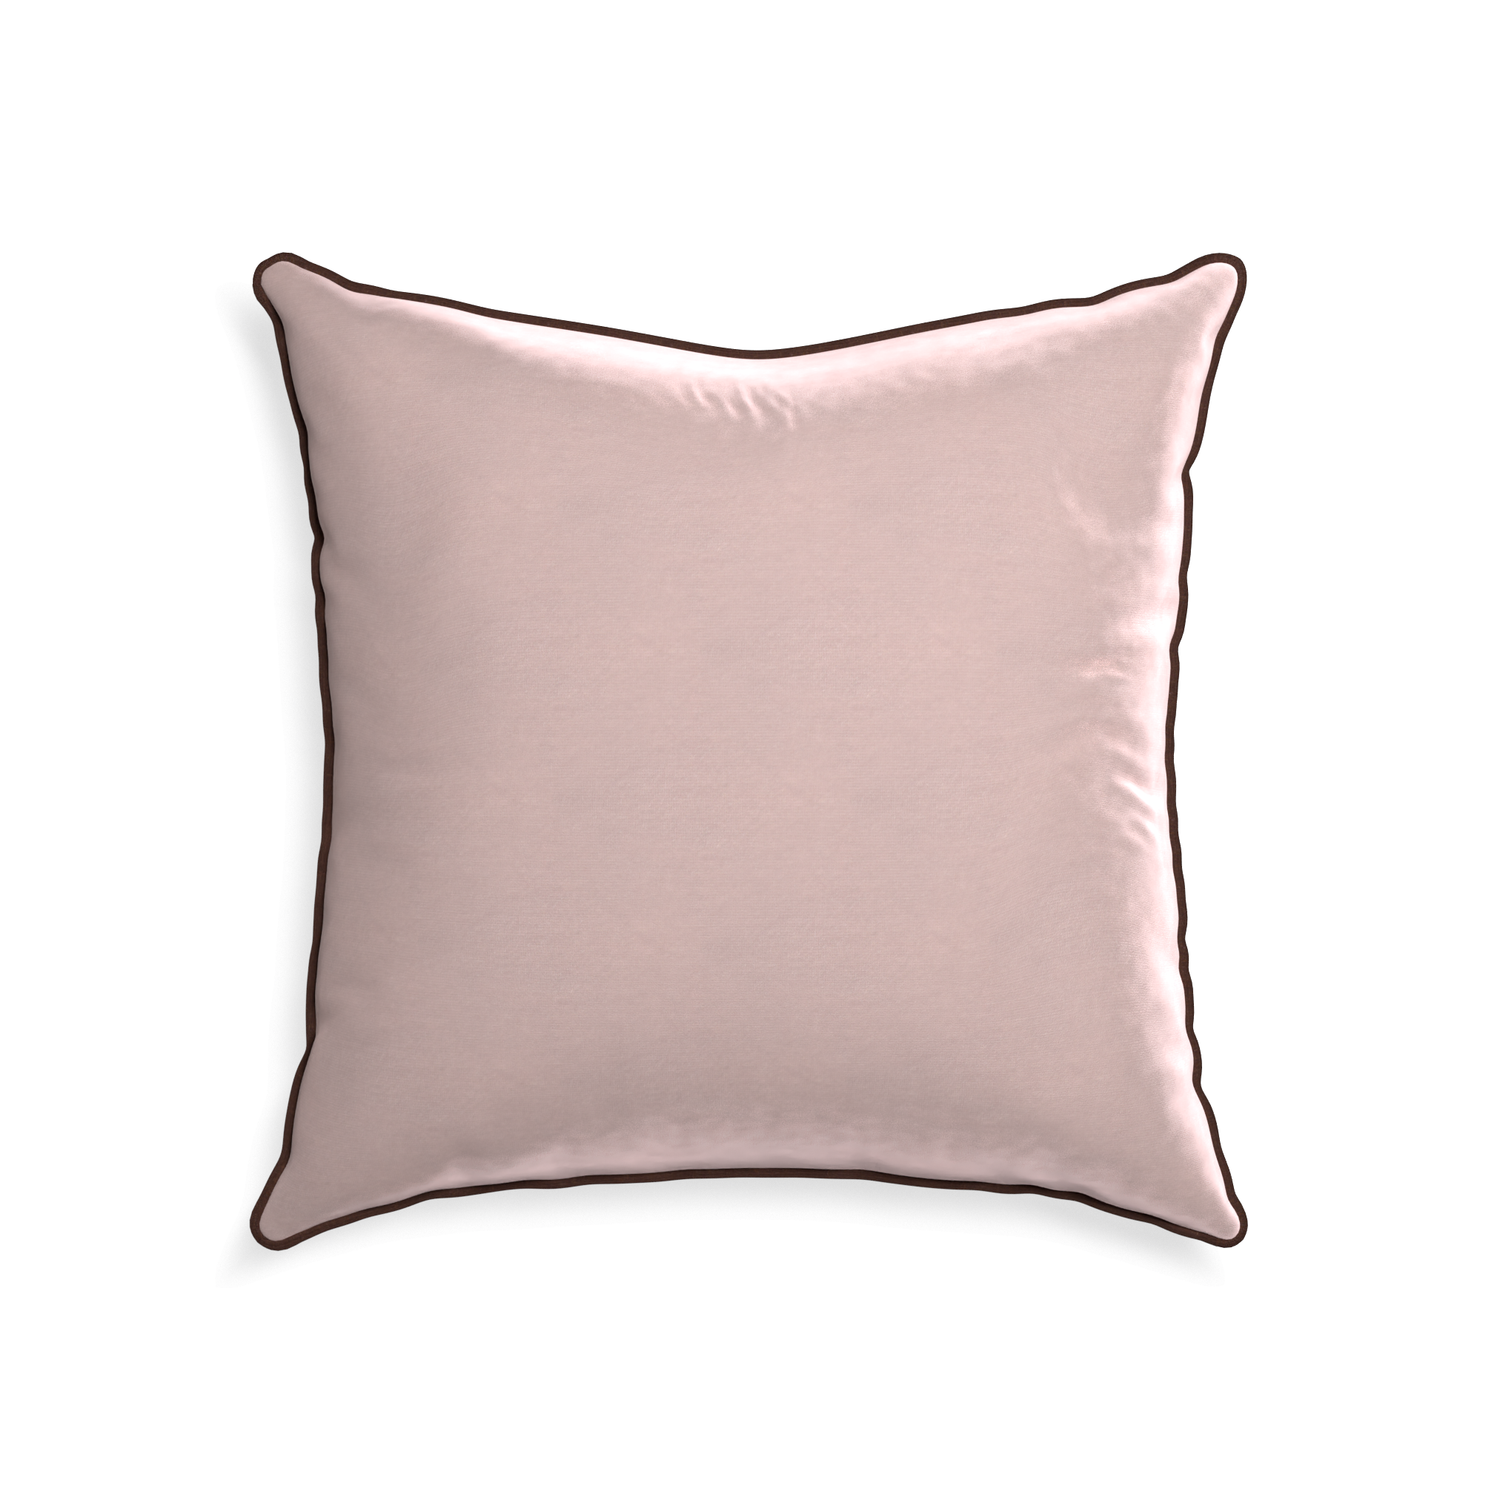 square light pink velvet pillow with brown piping 